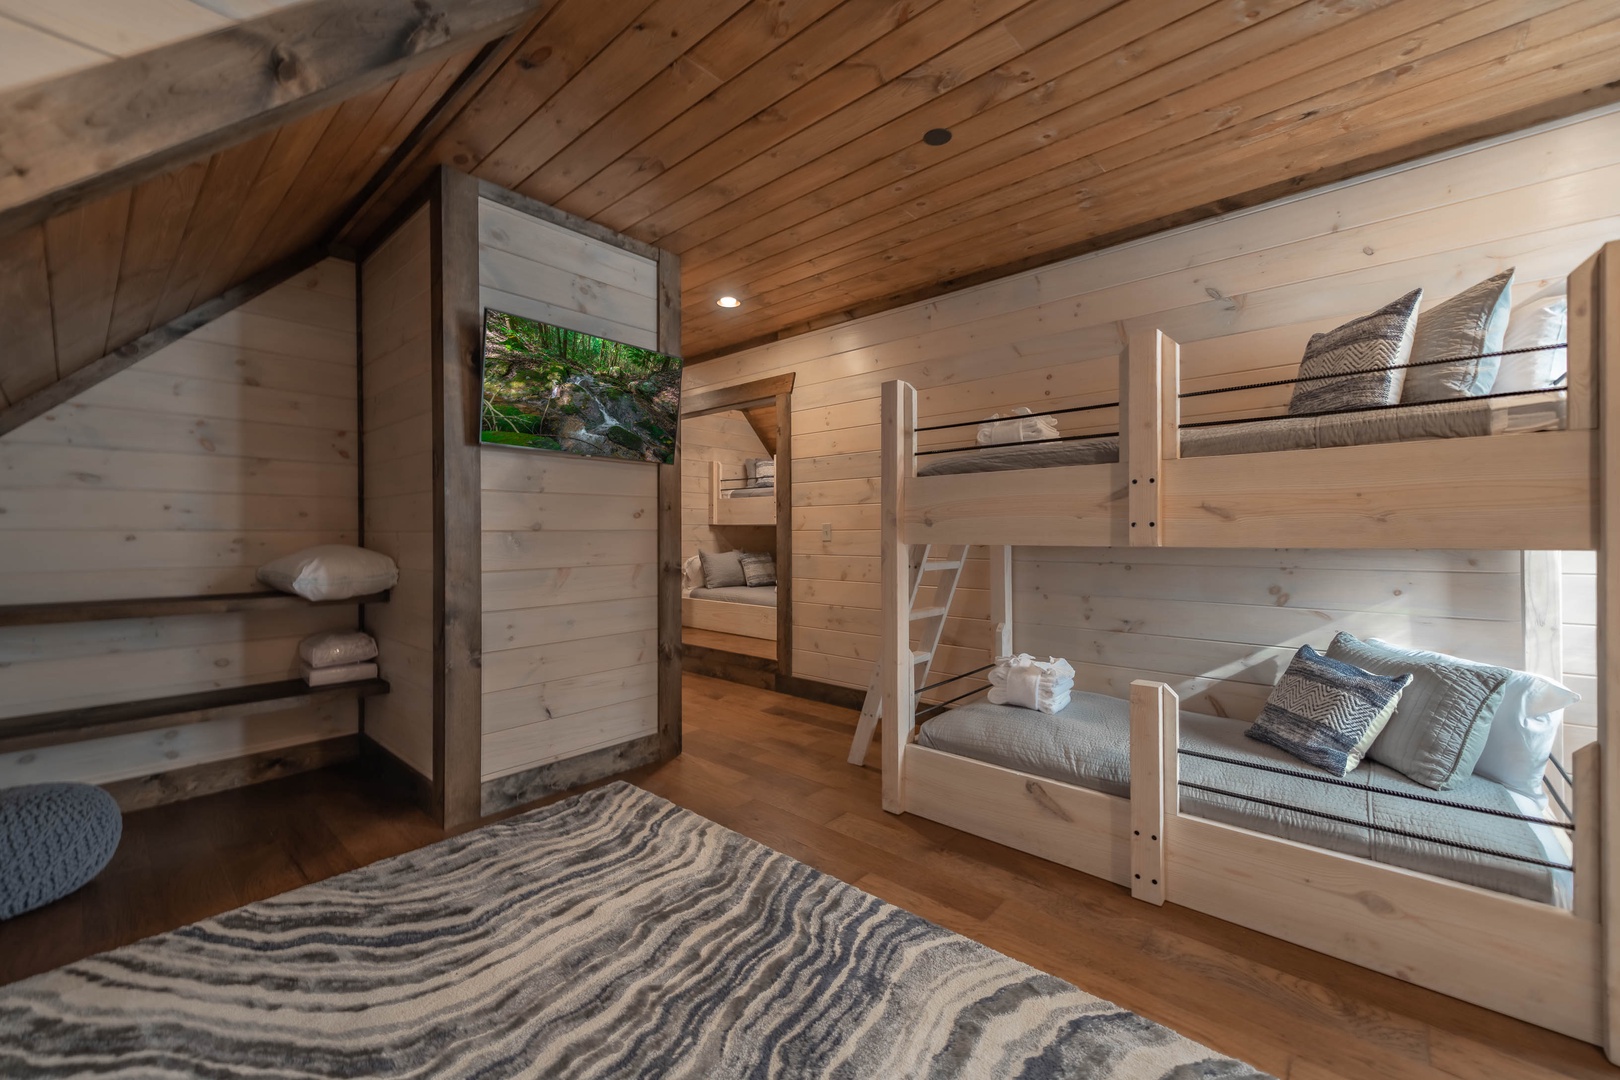 The Ridgeline Retreat- Upper level bunk room area with a mounted TV